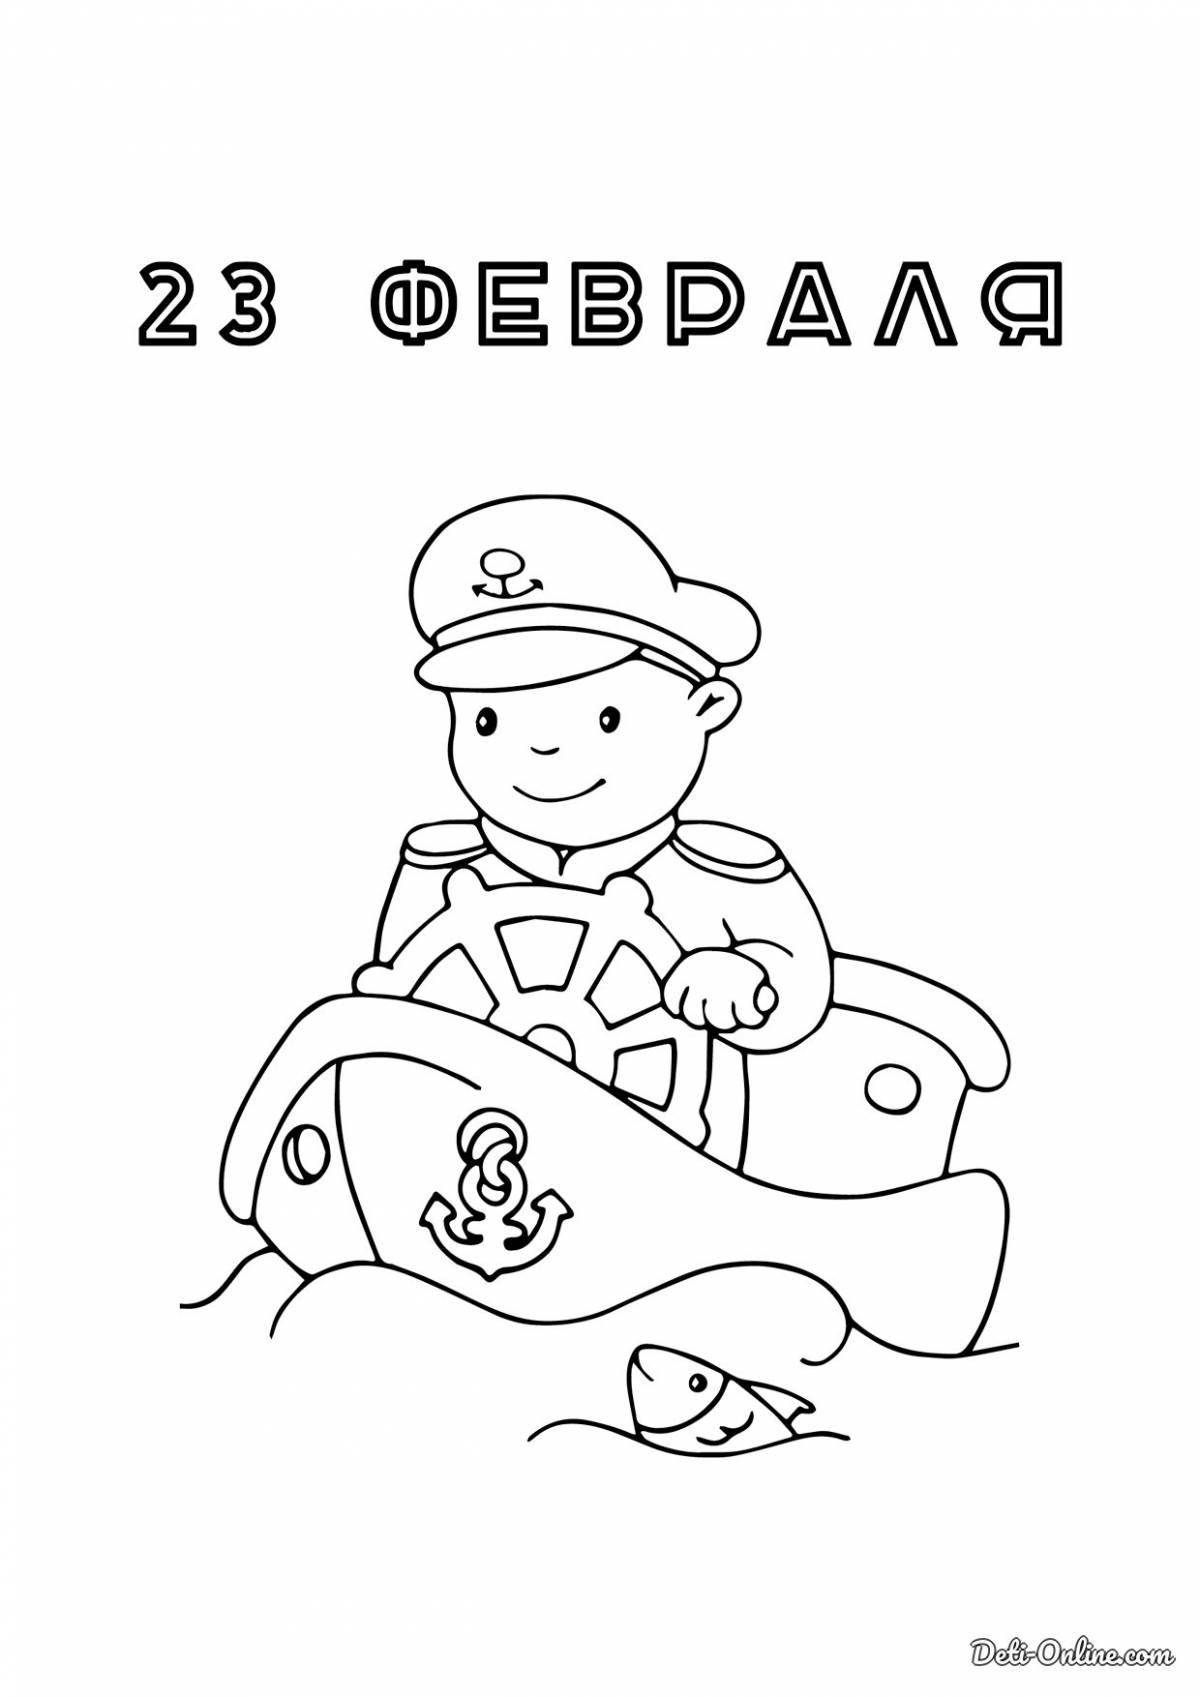 February 23 emblem coloring page